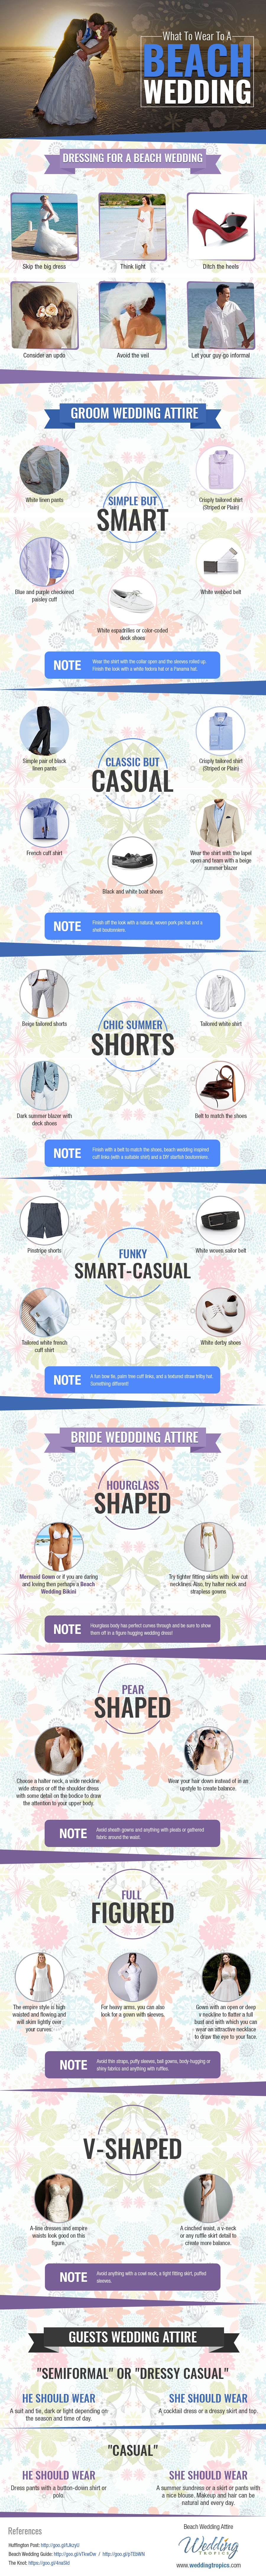 Infografic about What To Wear To A Beach Wedding